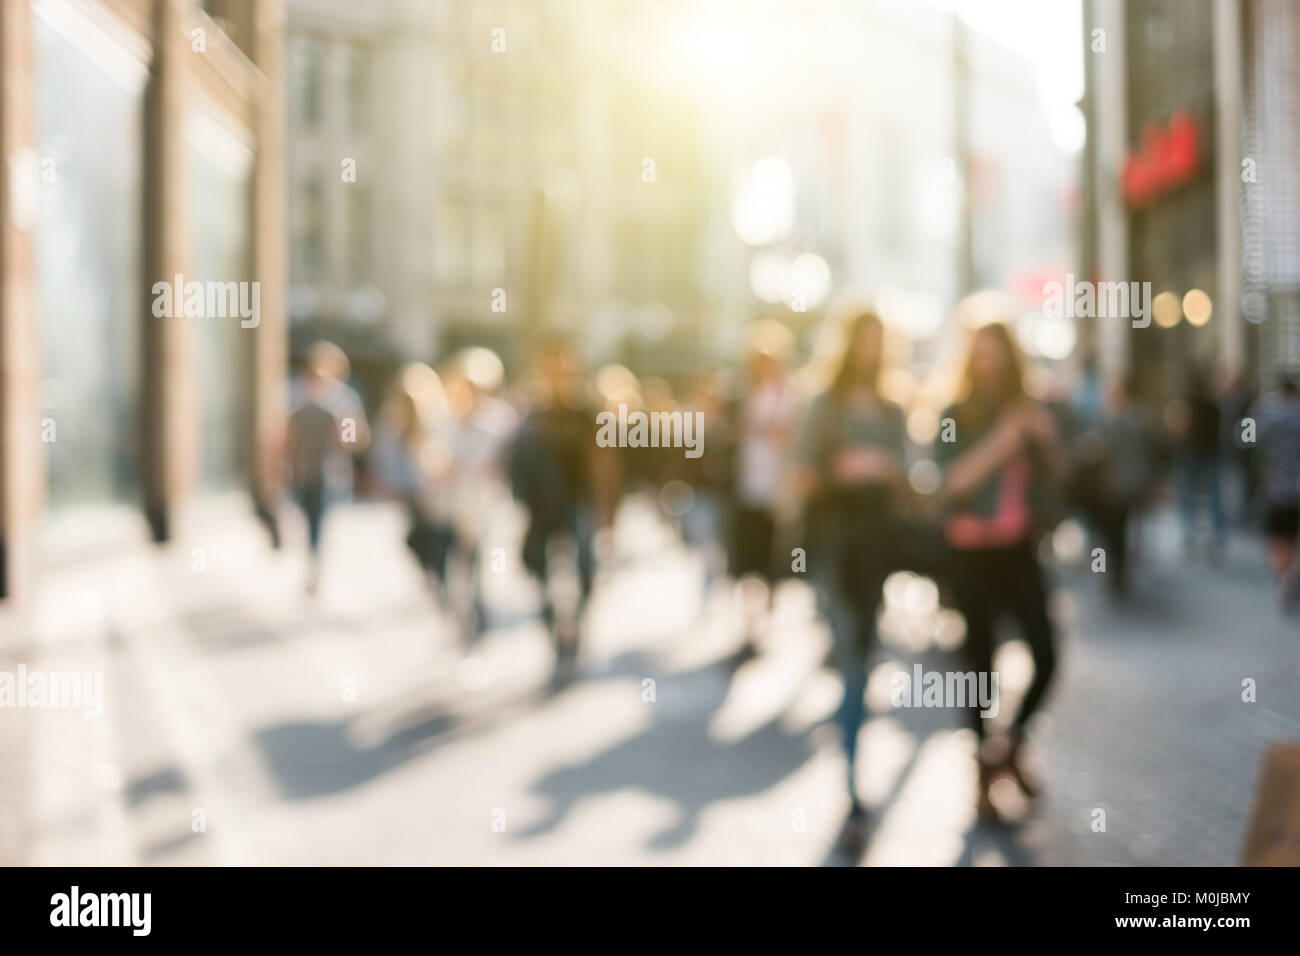 blurred people in a shopping street Stock Photo